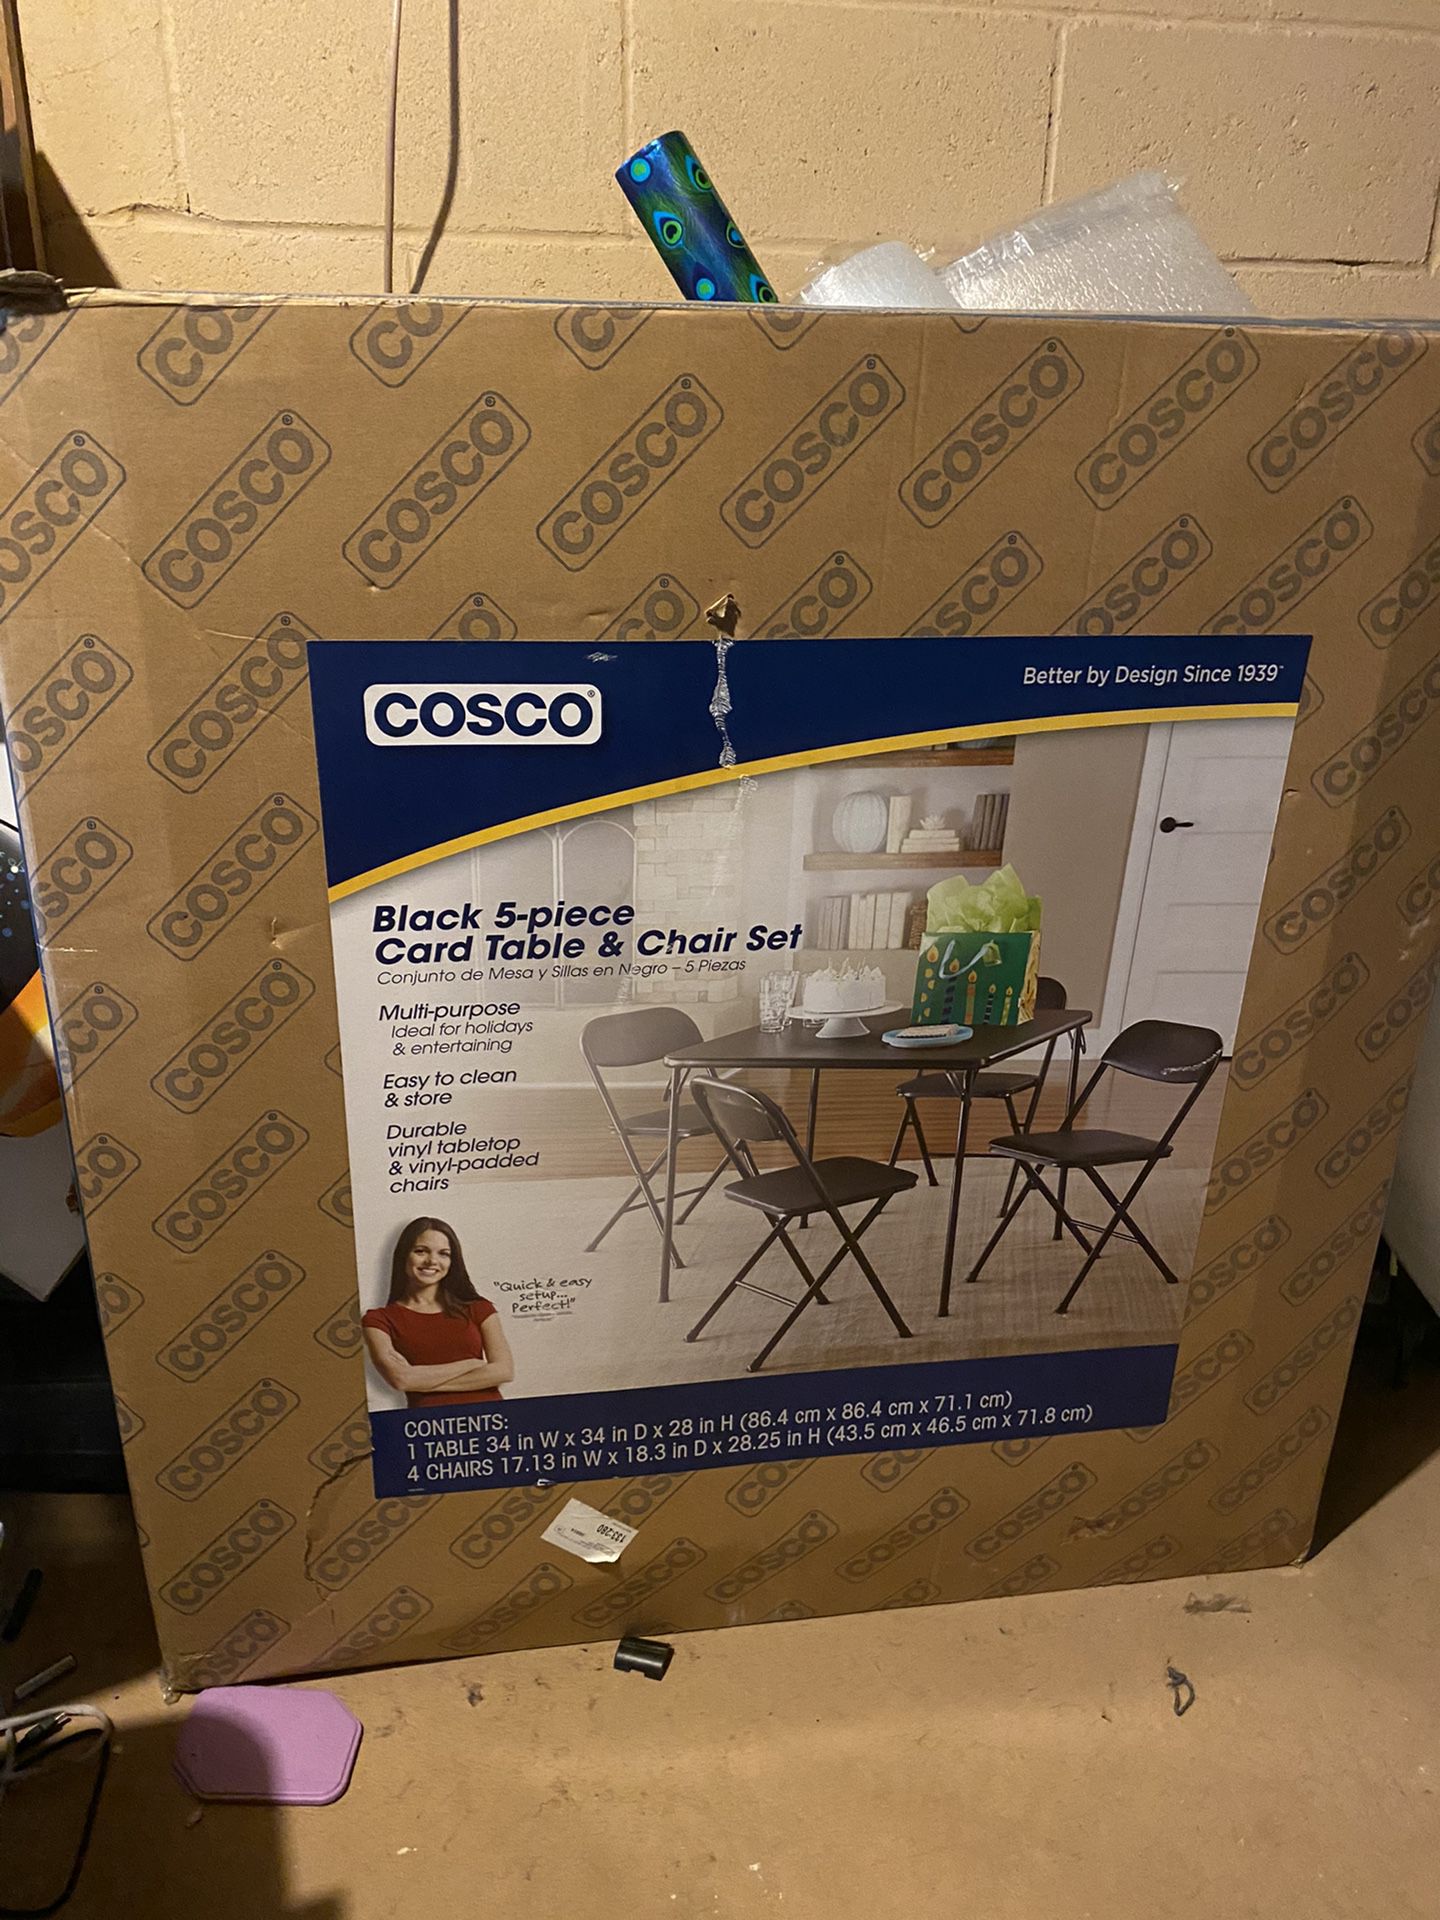 Cosco table and chair set still in box.